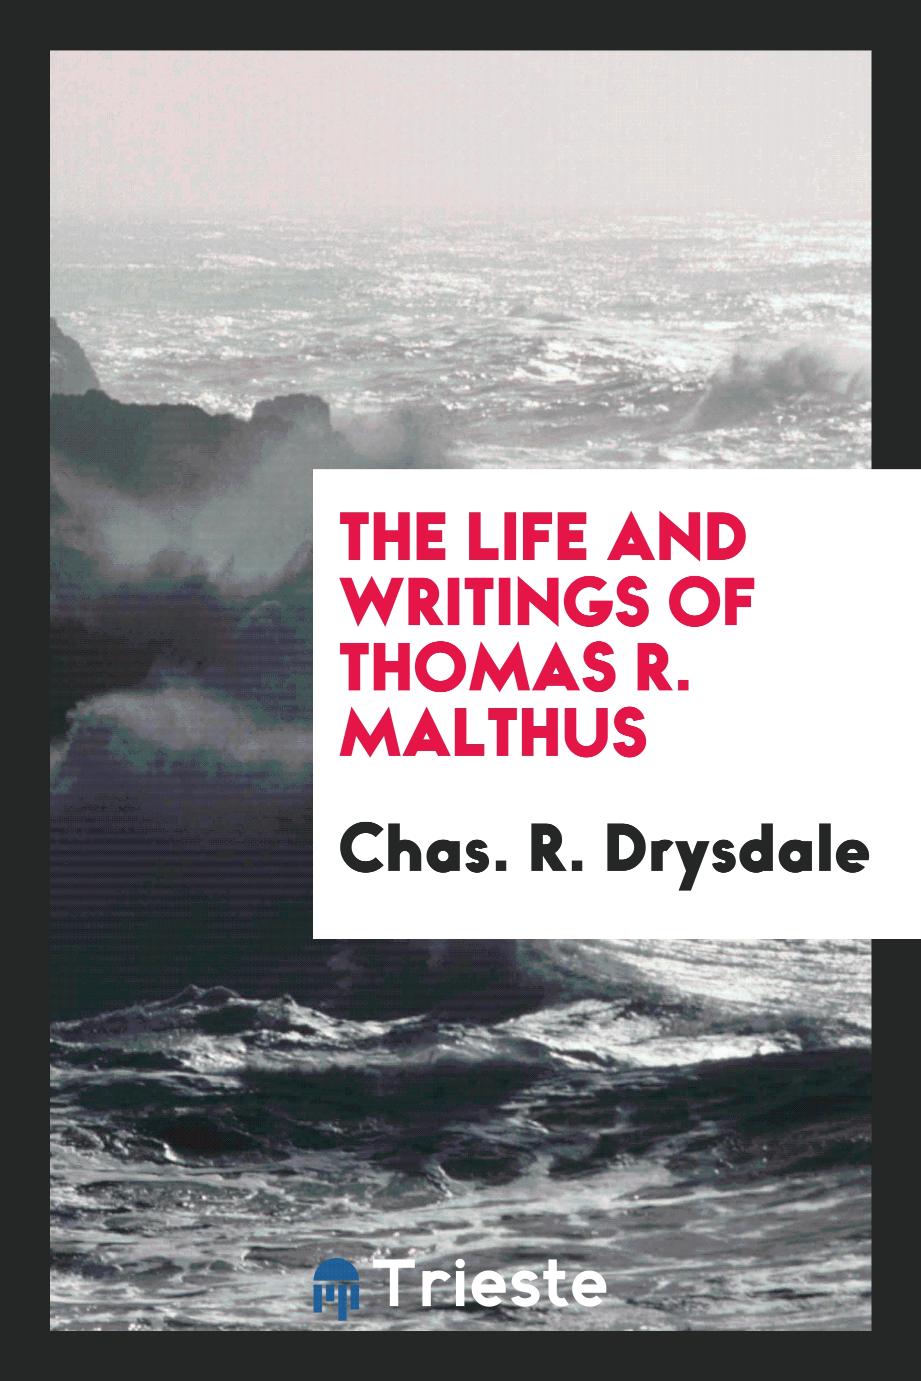 The Life and Writings of Thomas R. Malthus